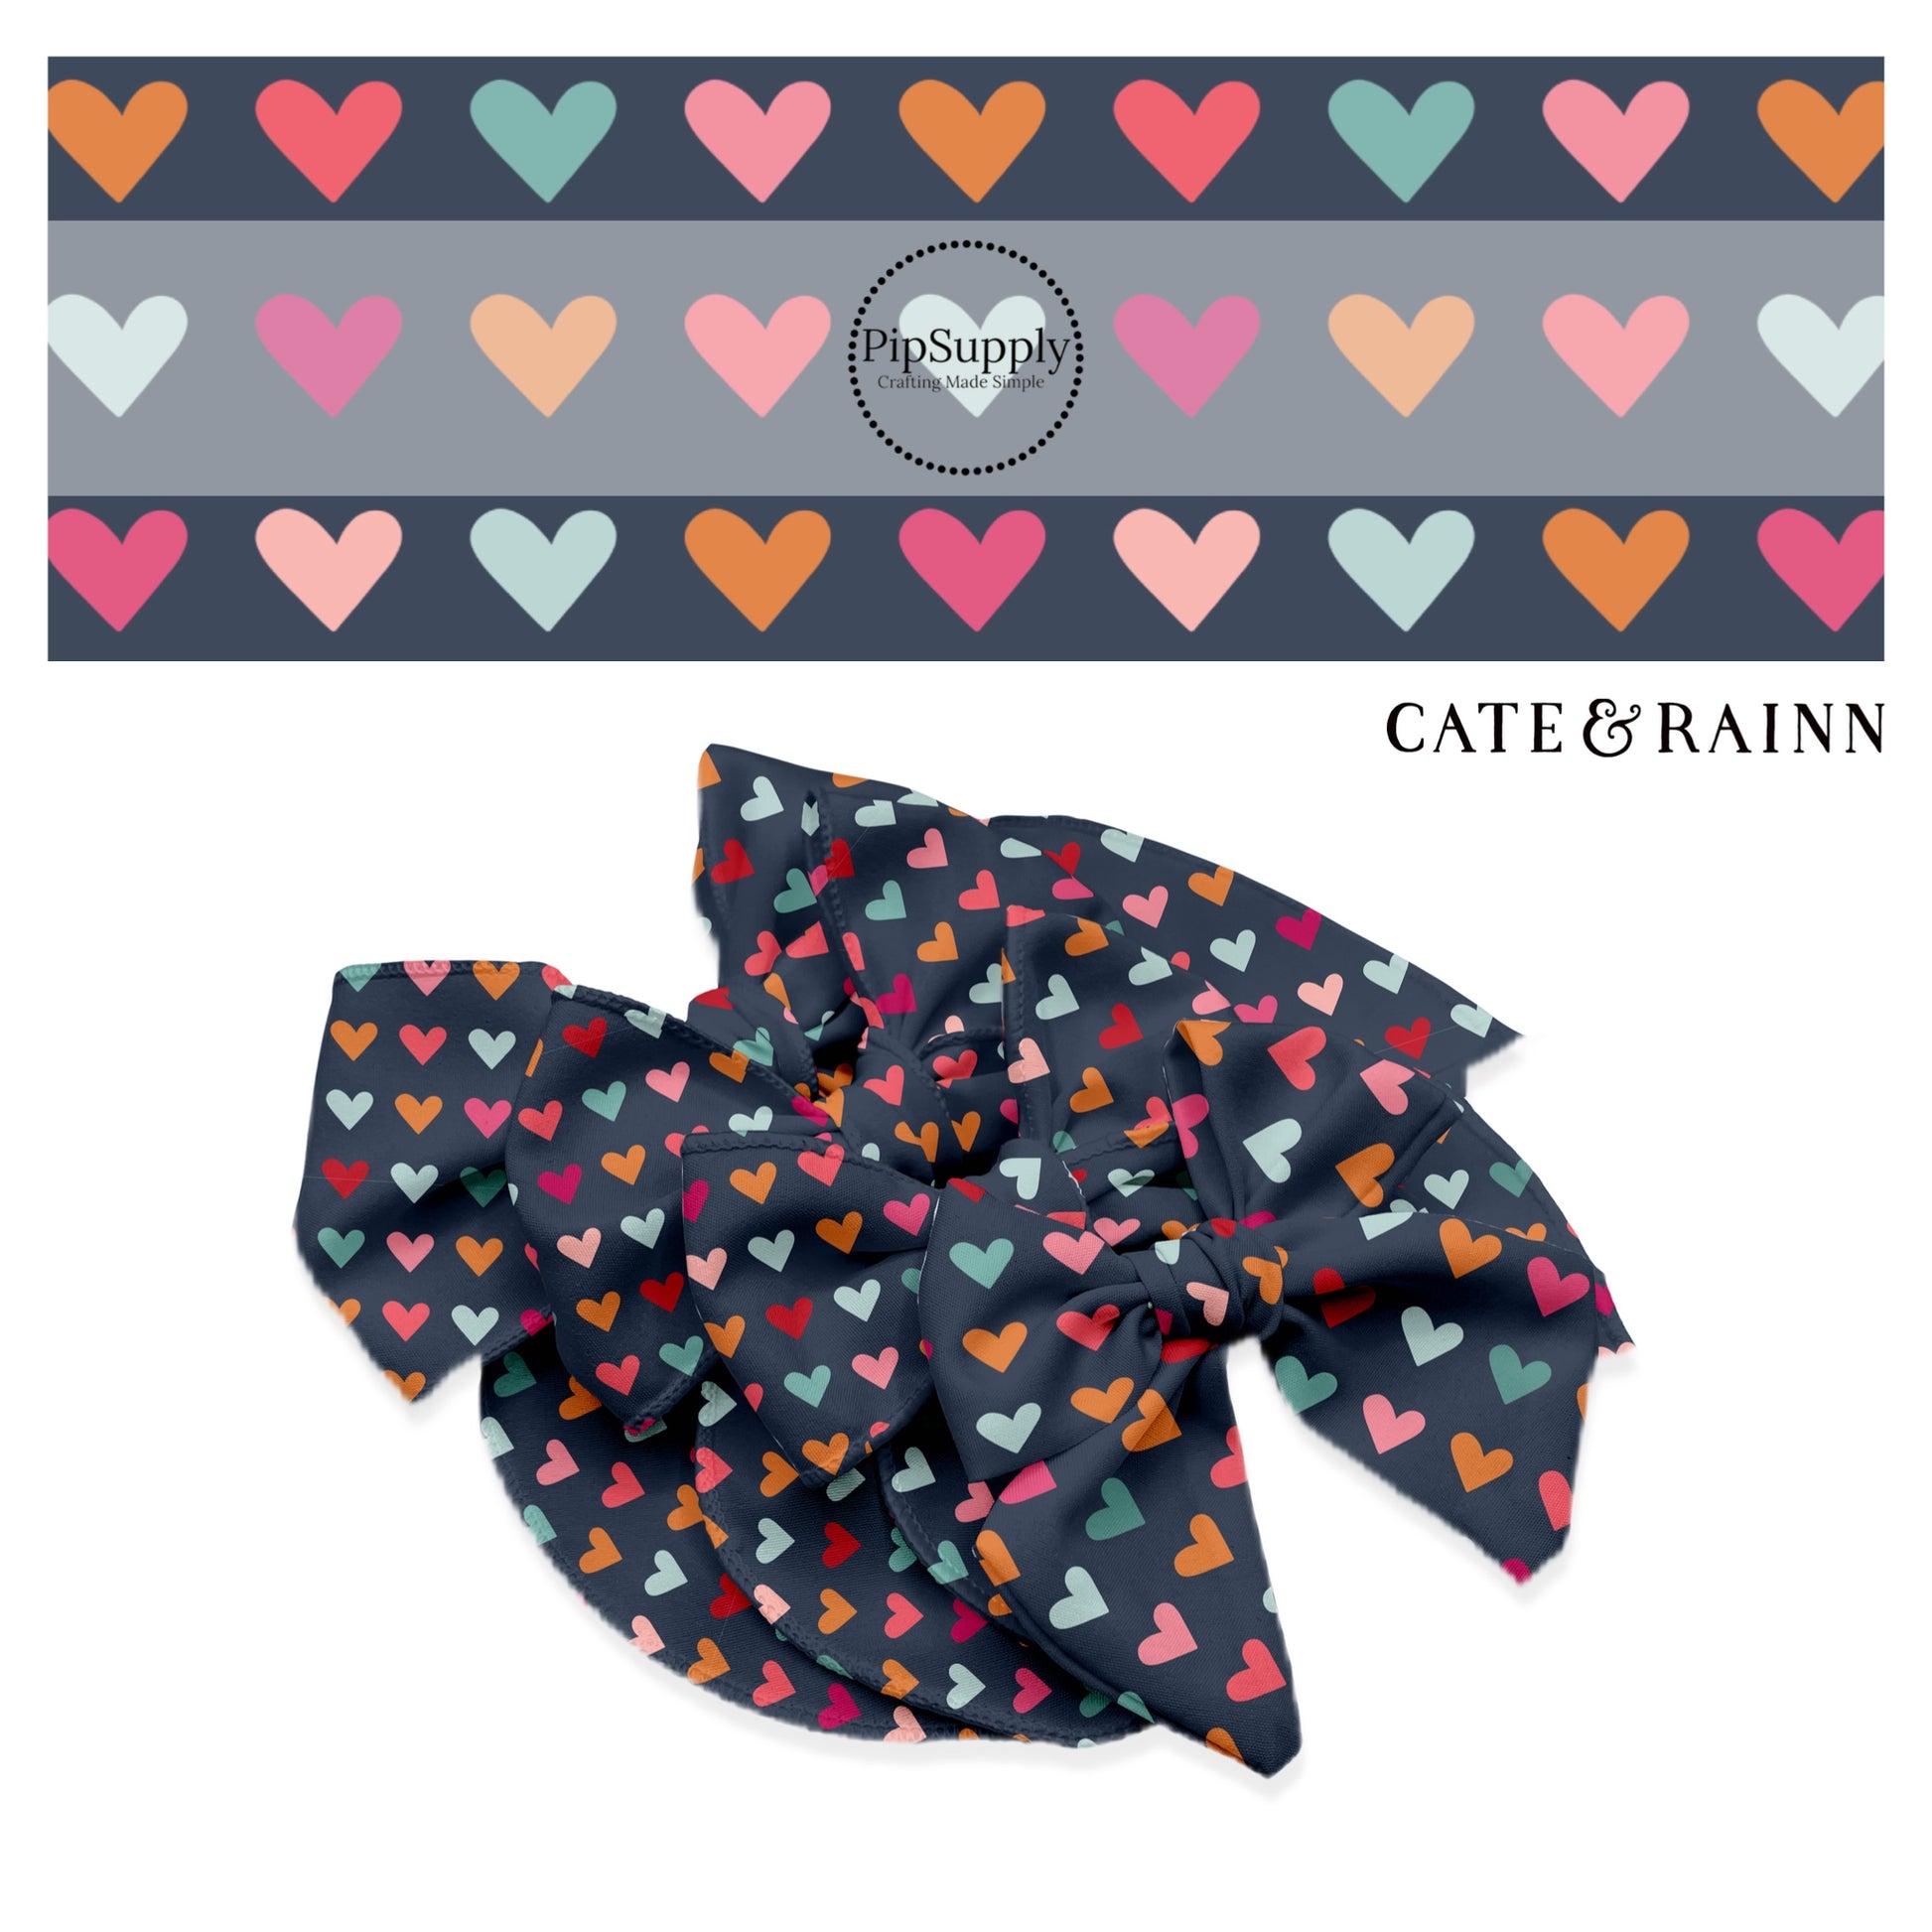 Hot pink, light pink, light blue, orange, and teal hearts on navy blue bow strips